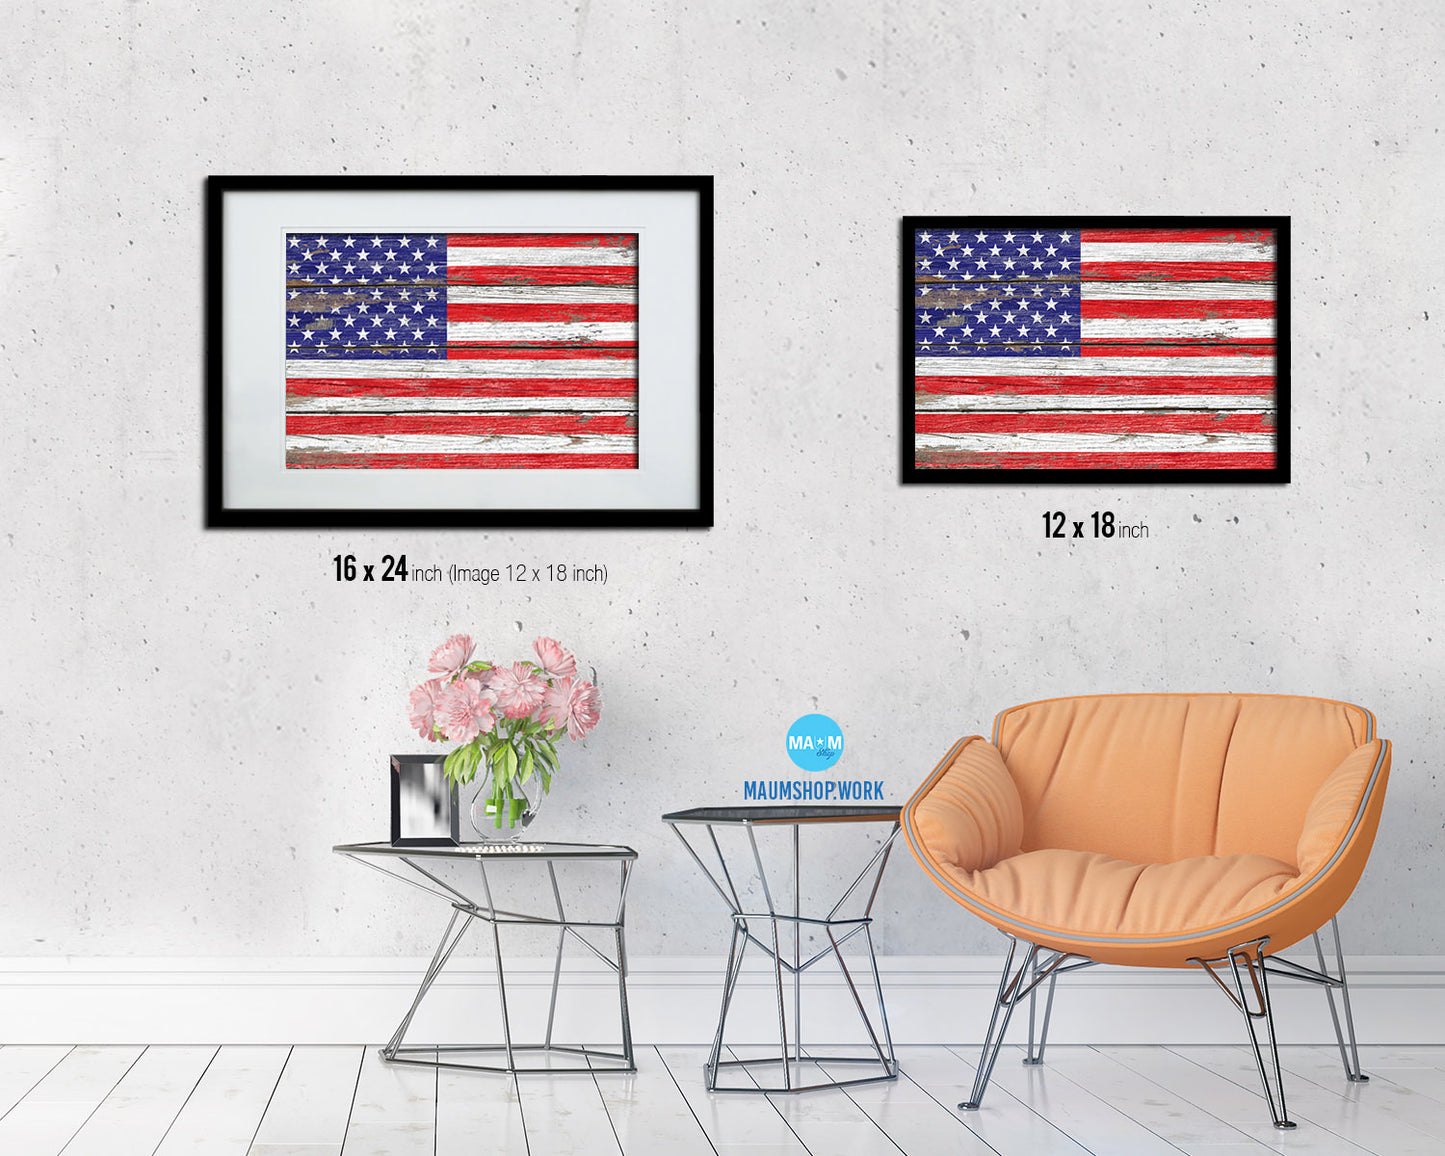 USA Country Wood Rustic National Flag Wood Framed Print Wall Art Decor Gifts